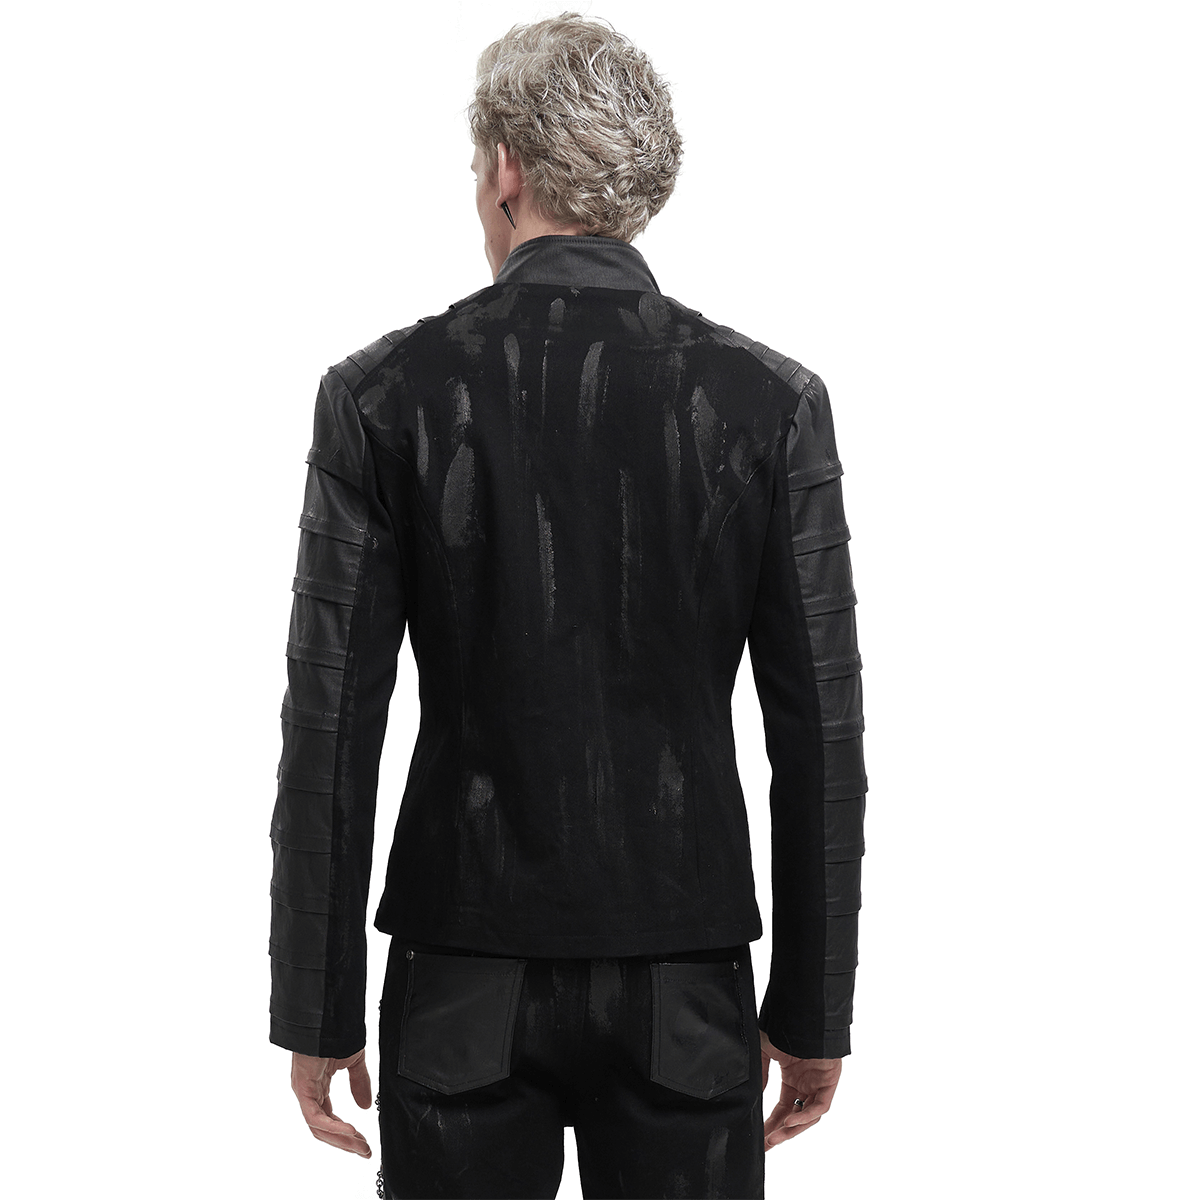 Men's Gothic Stand Collar Jacket with Metal Eyelets